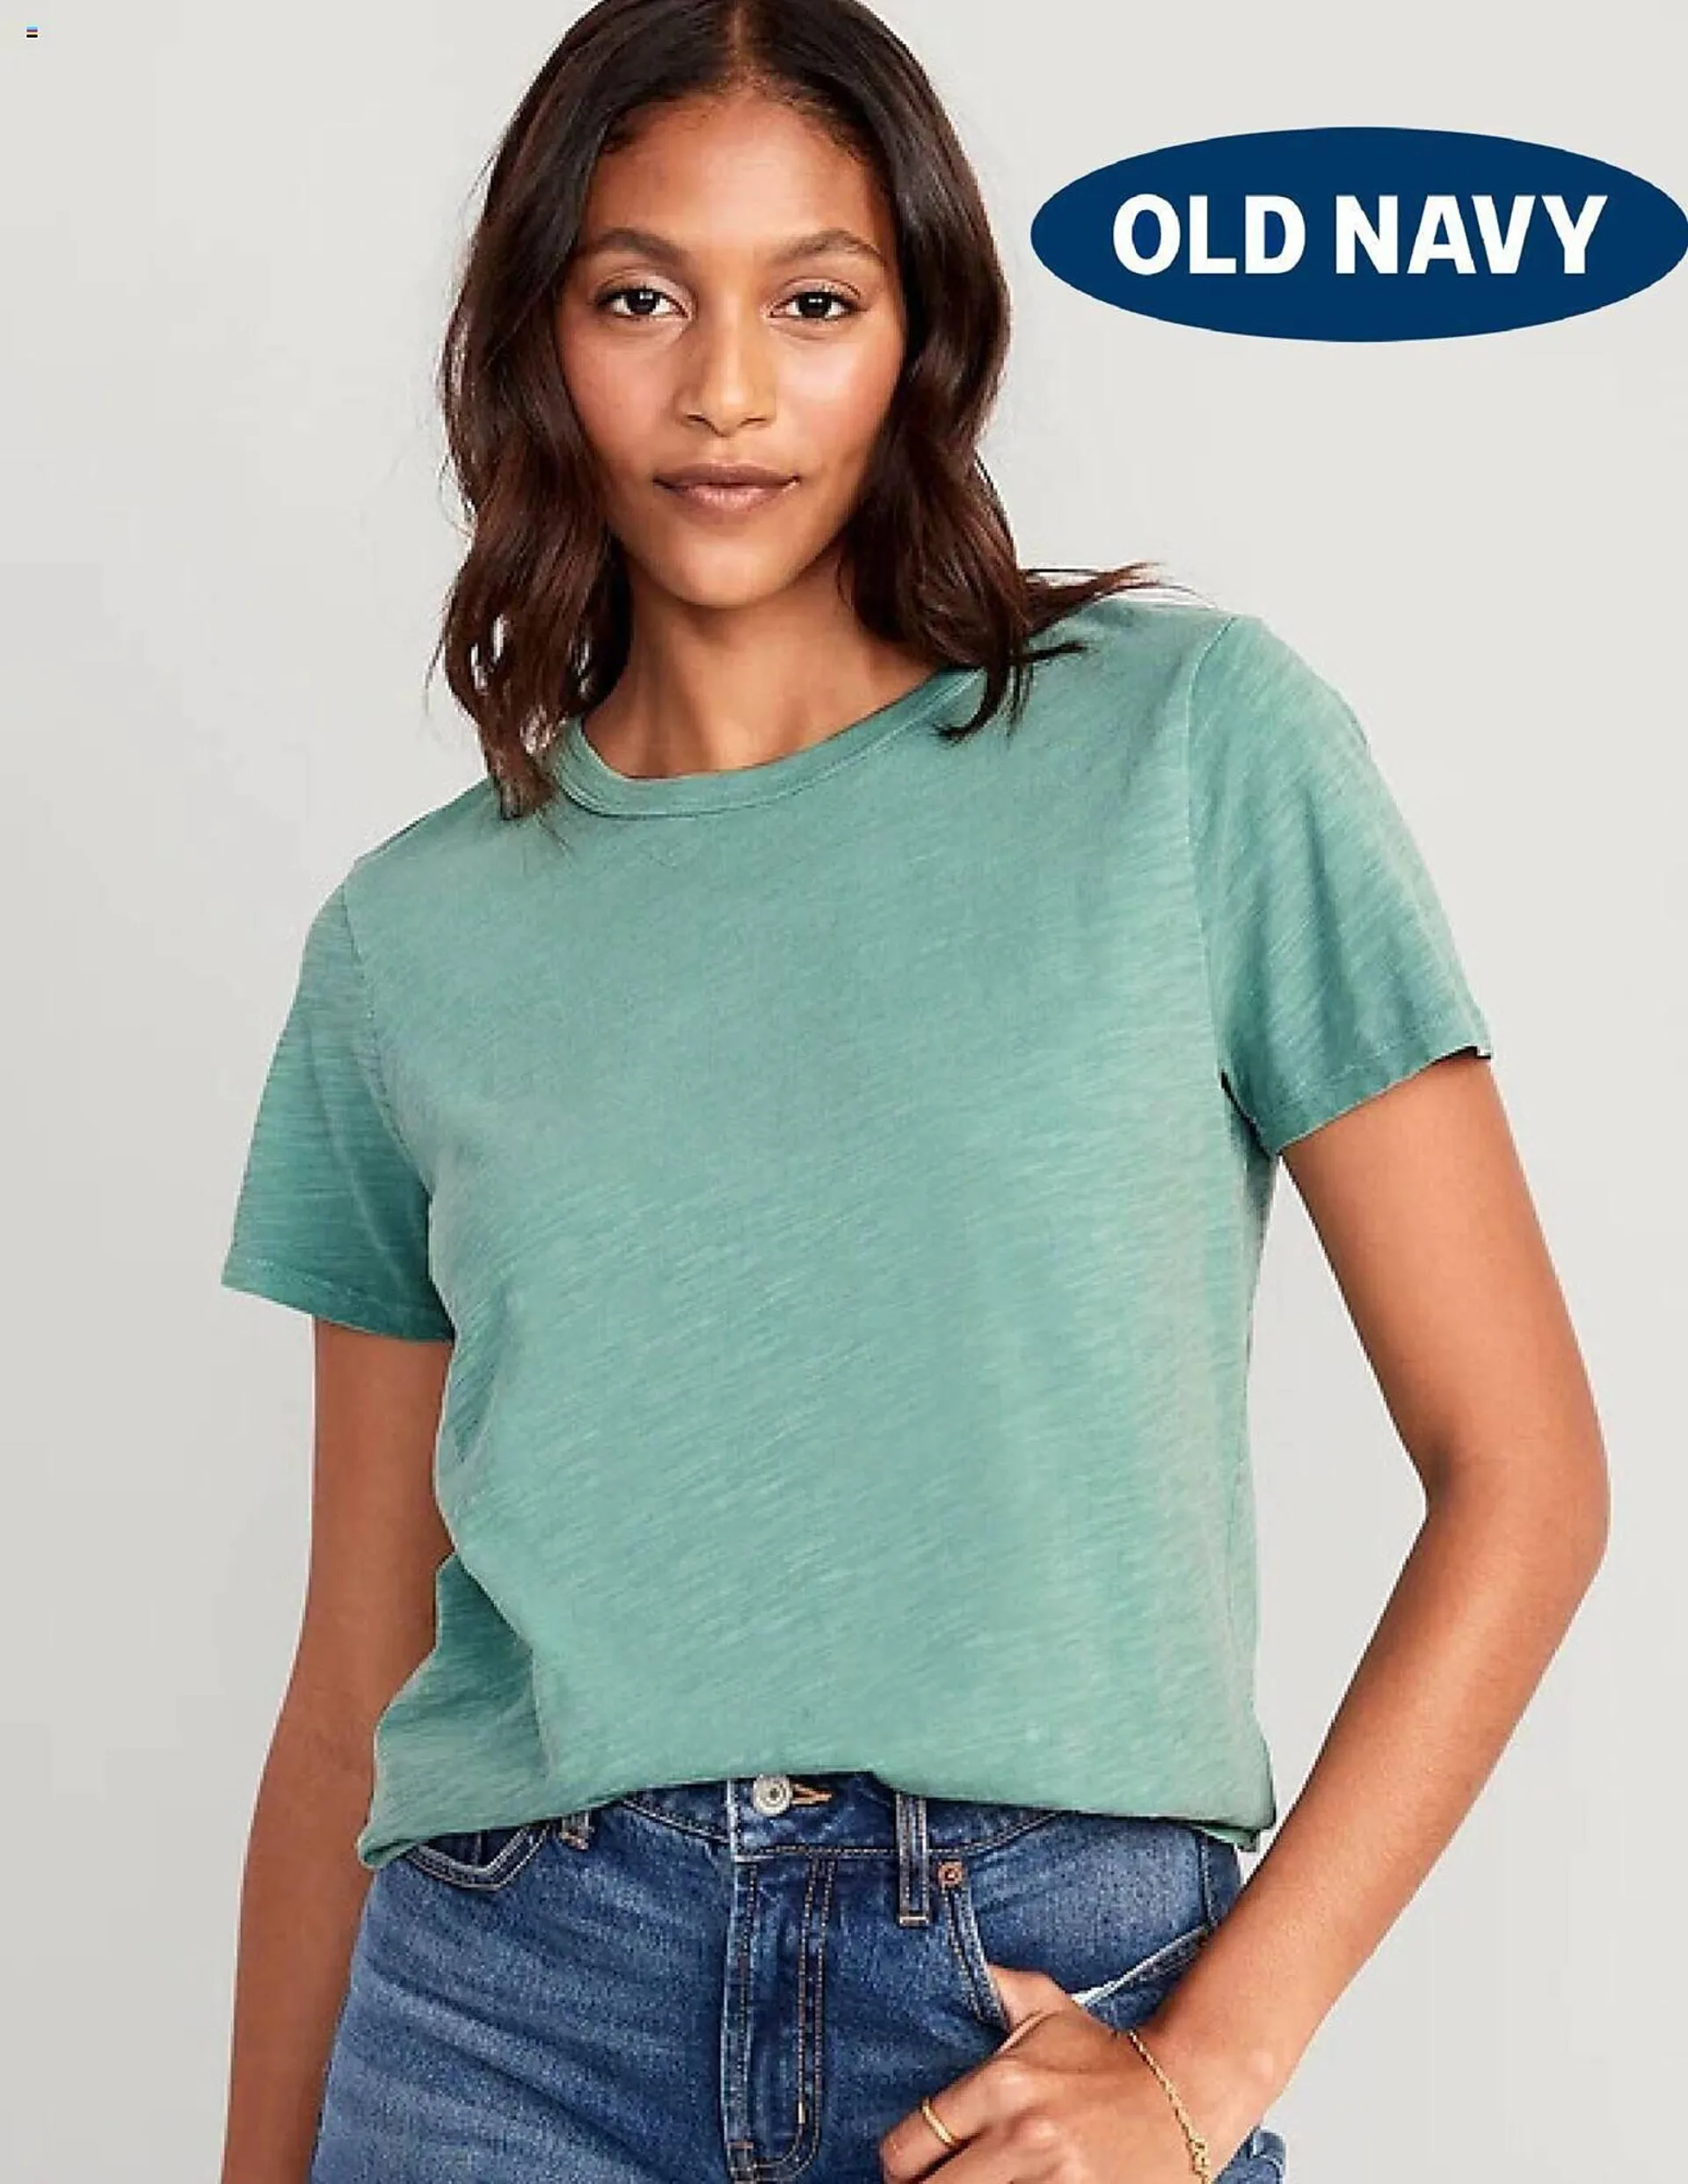 Old Navy ad - 1